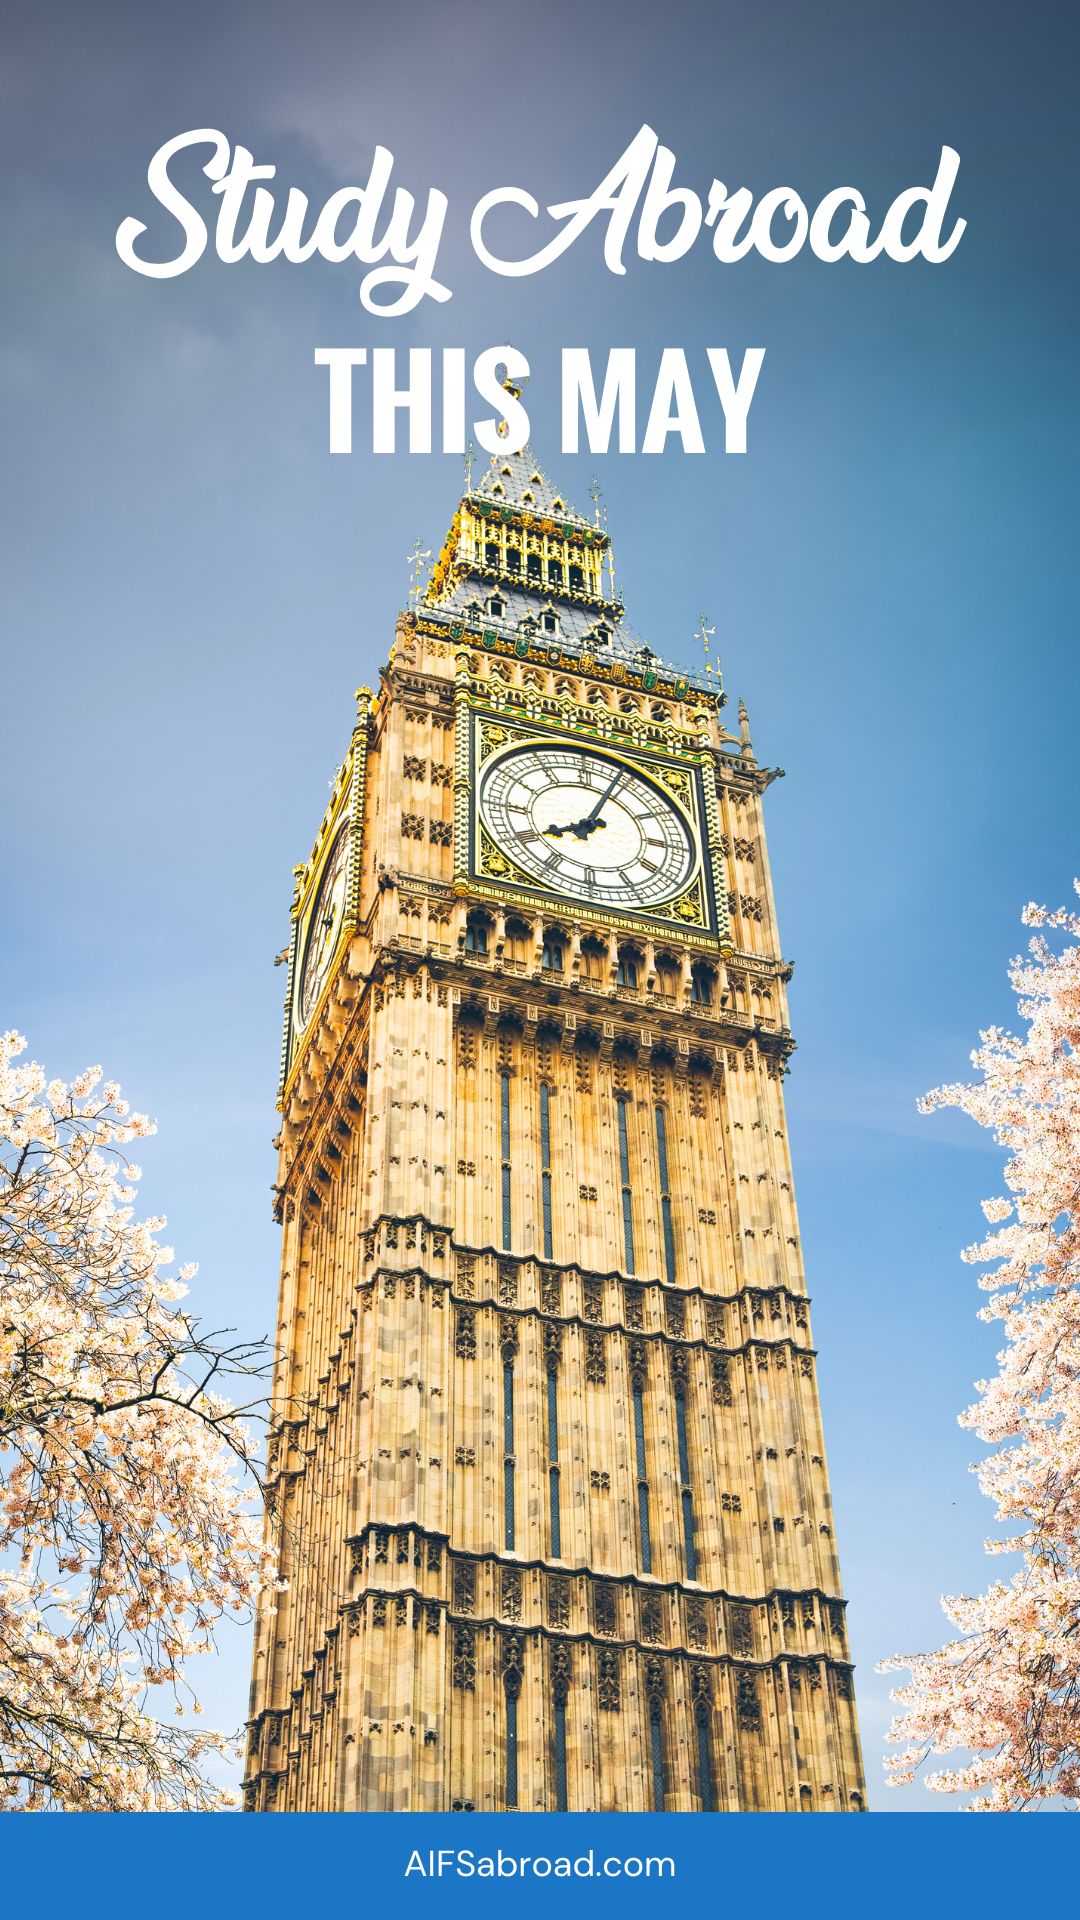 Pin image: London's Big Ben during Springtime with text "Study Abroad this May"